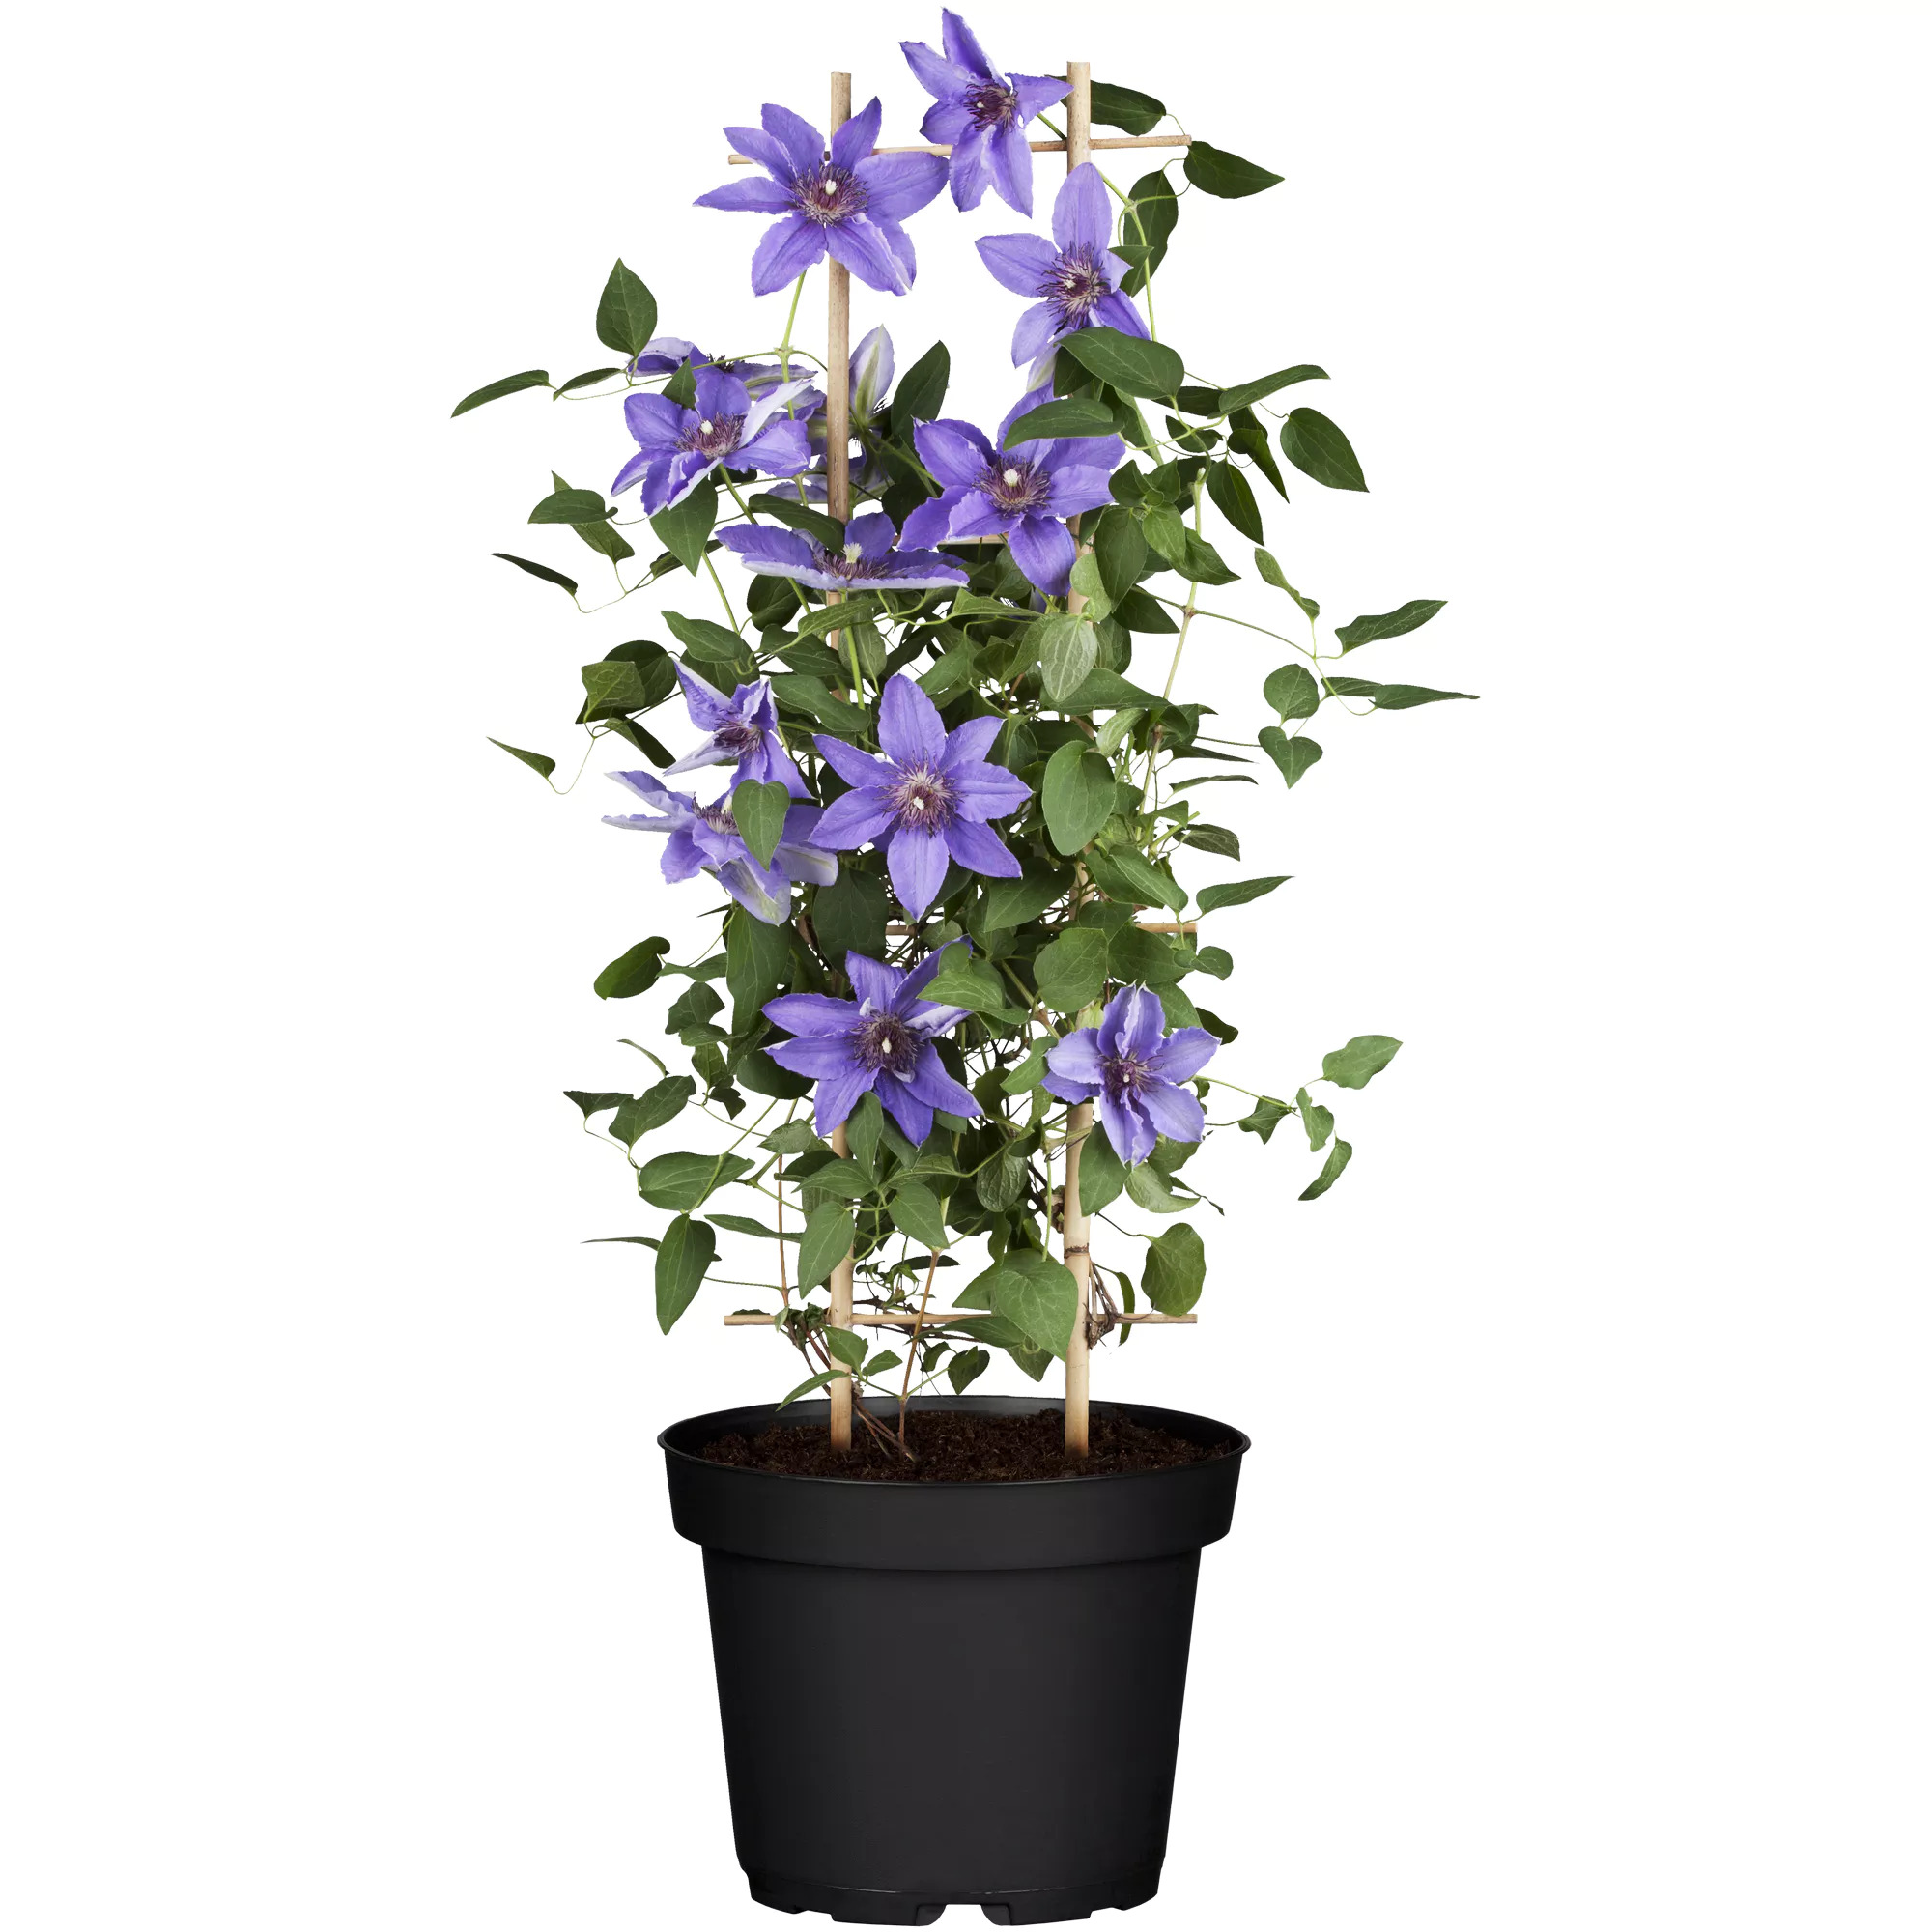 Clematis Standard blau 14 cm Topf + product picture